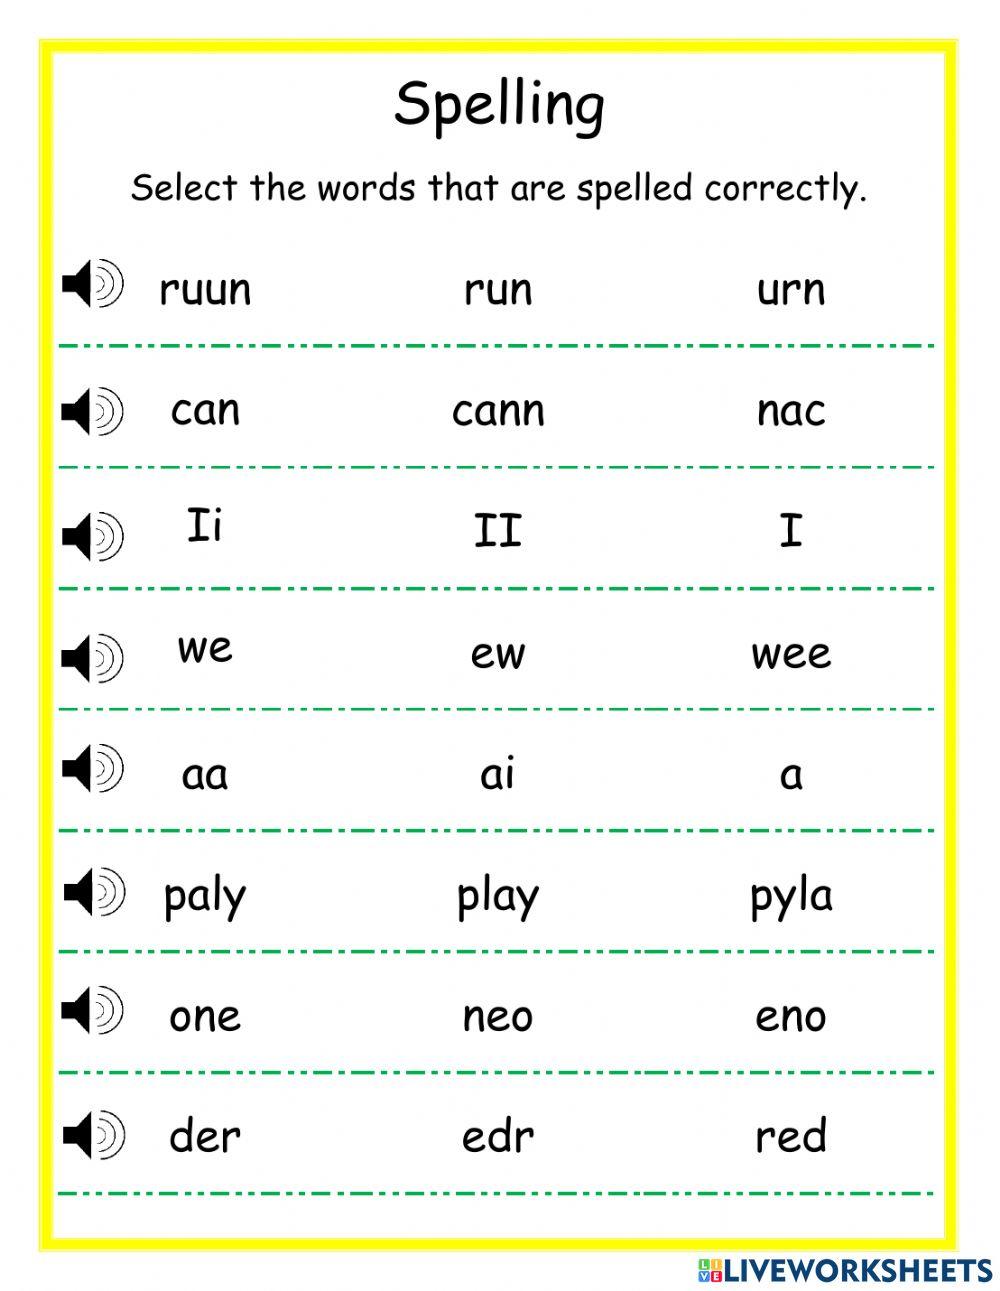 Spelling-select the word that is spelled correctly DJ